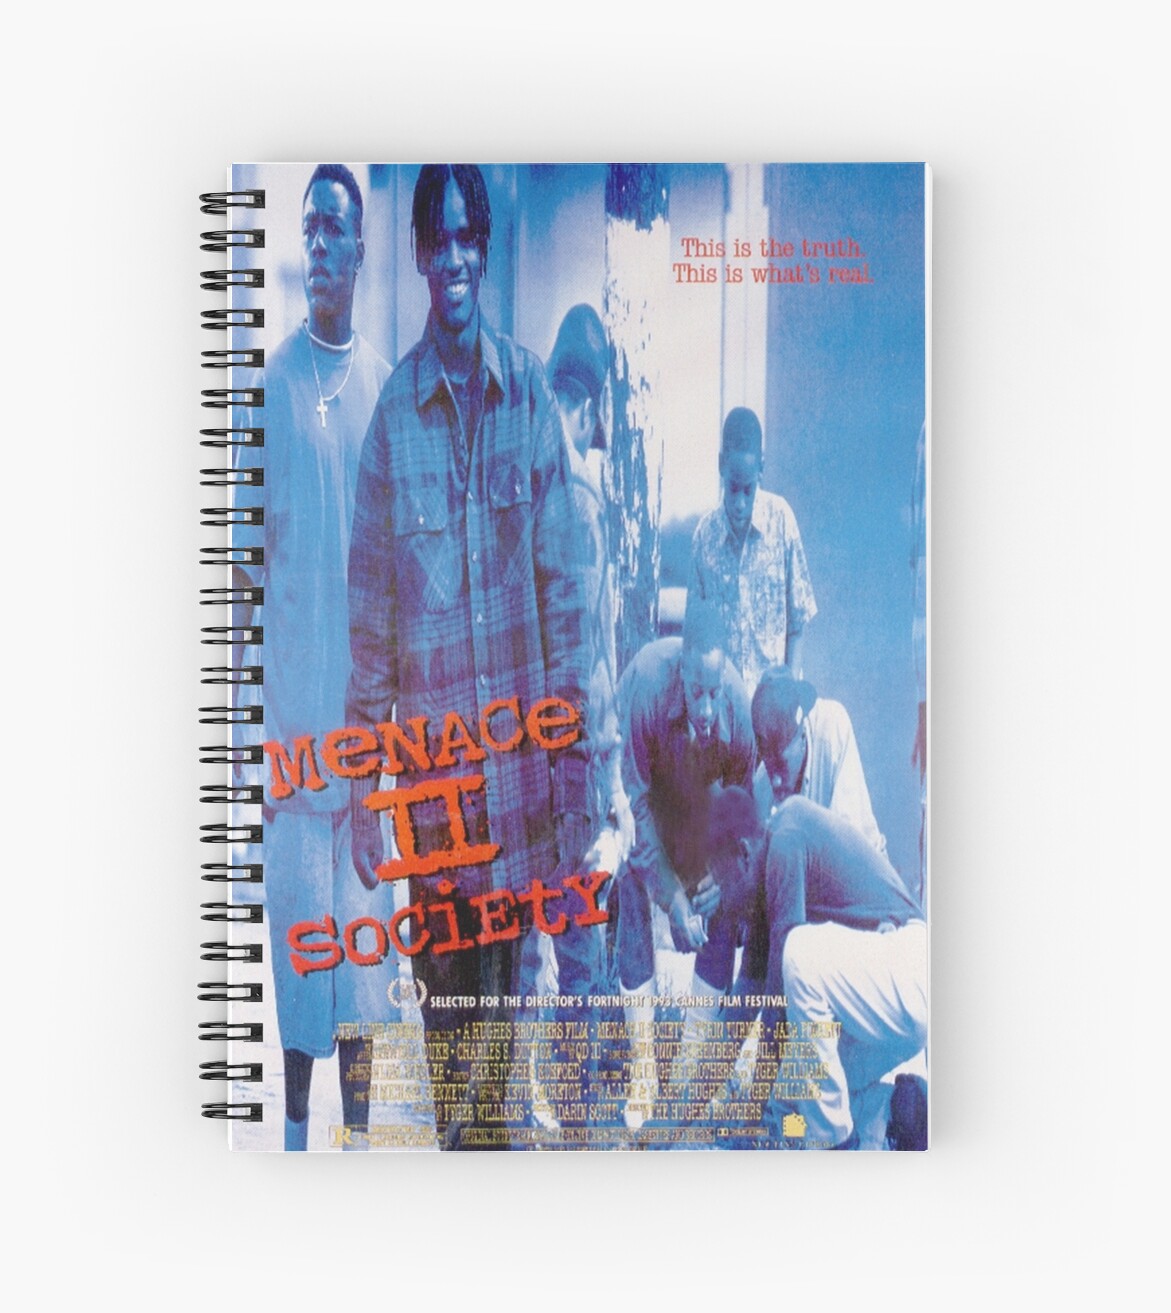 "Menace II Society Movie Poster" Spiral Notebooks by Art ...